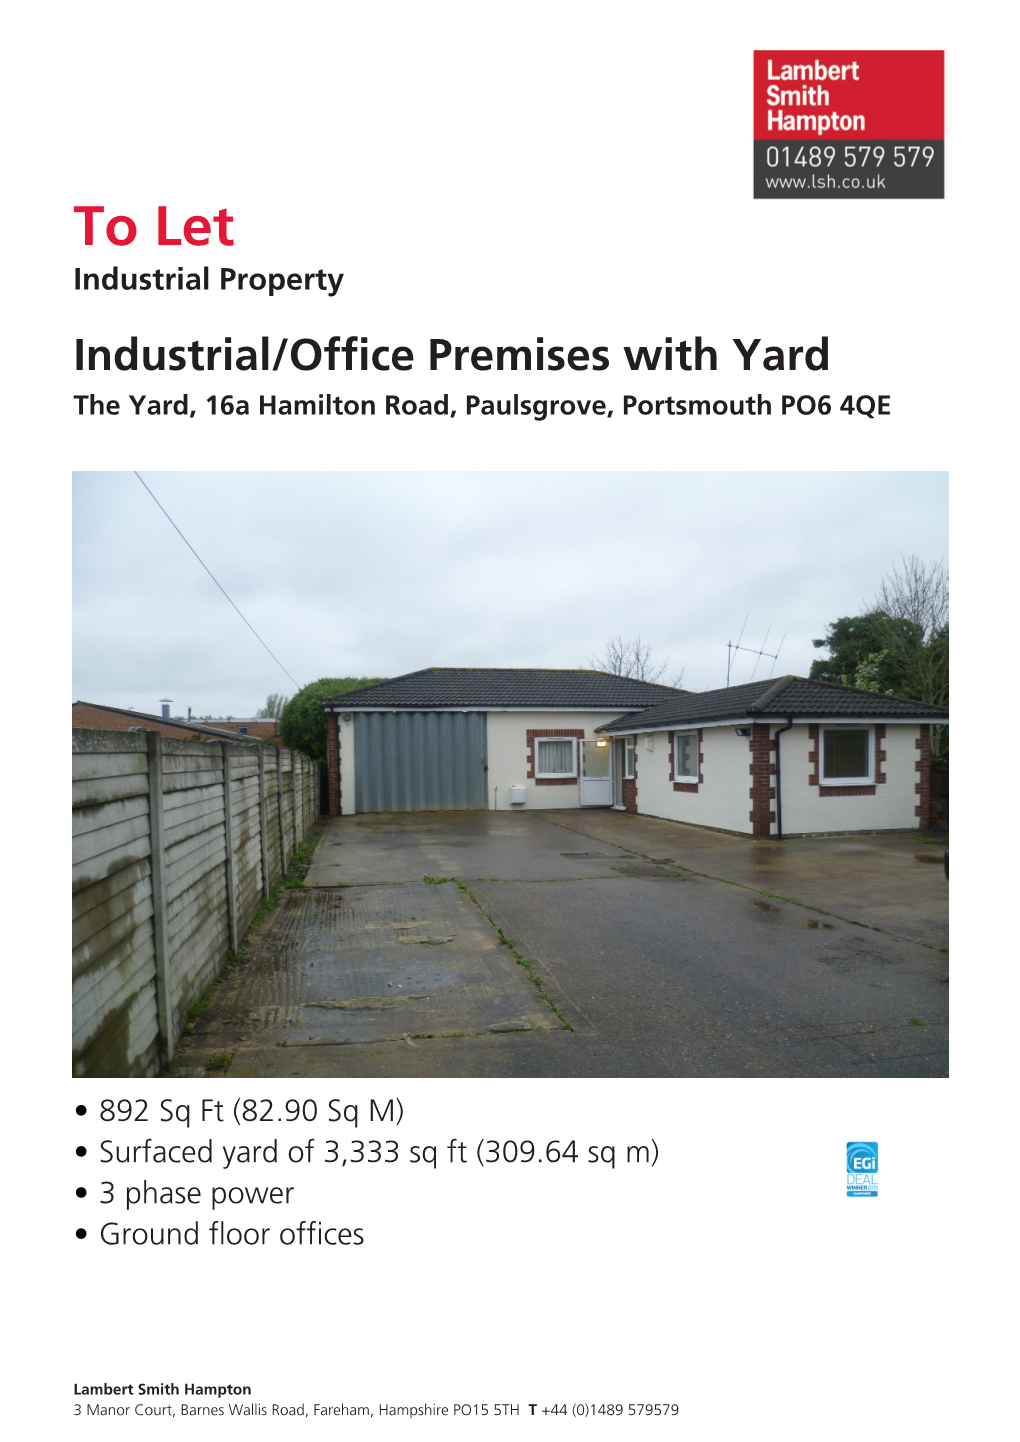 To Let,The Yard, 16A Hamilton Road, Paulsgrove, Portsmouth PO6